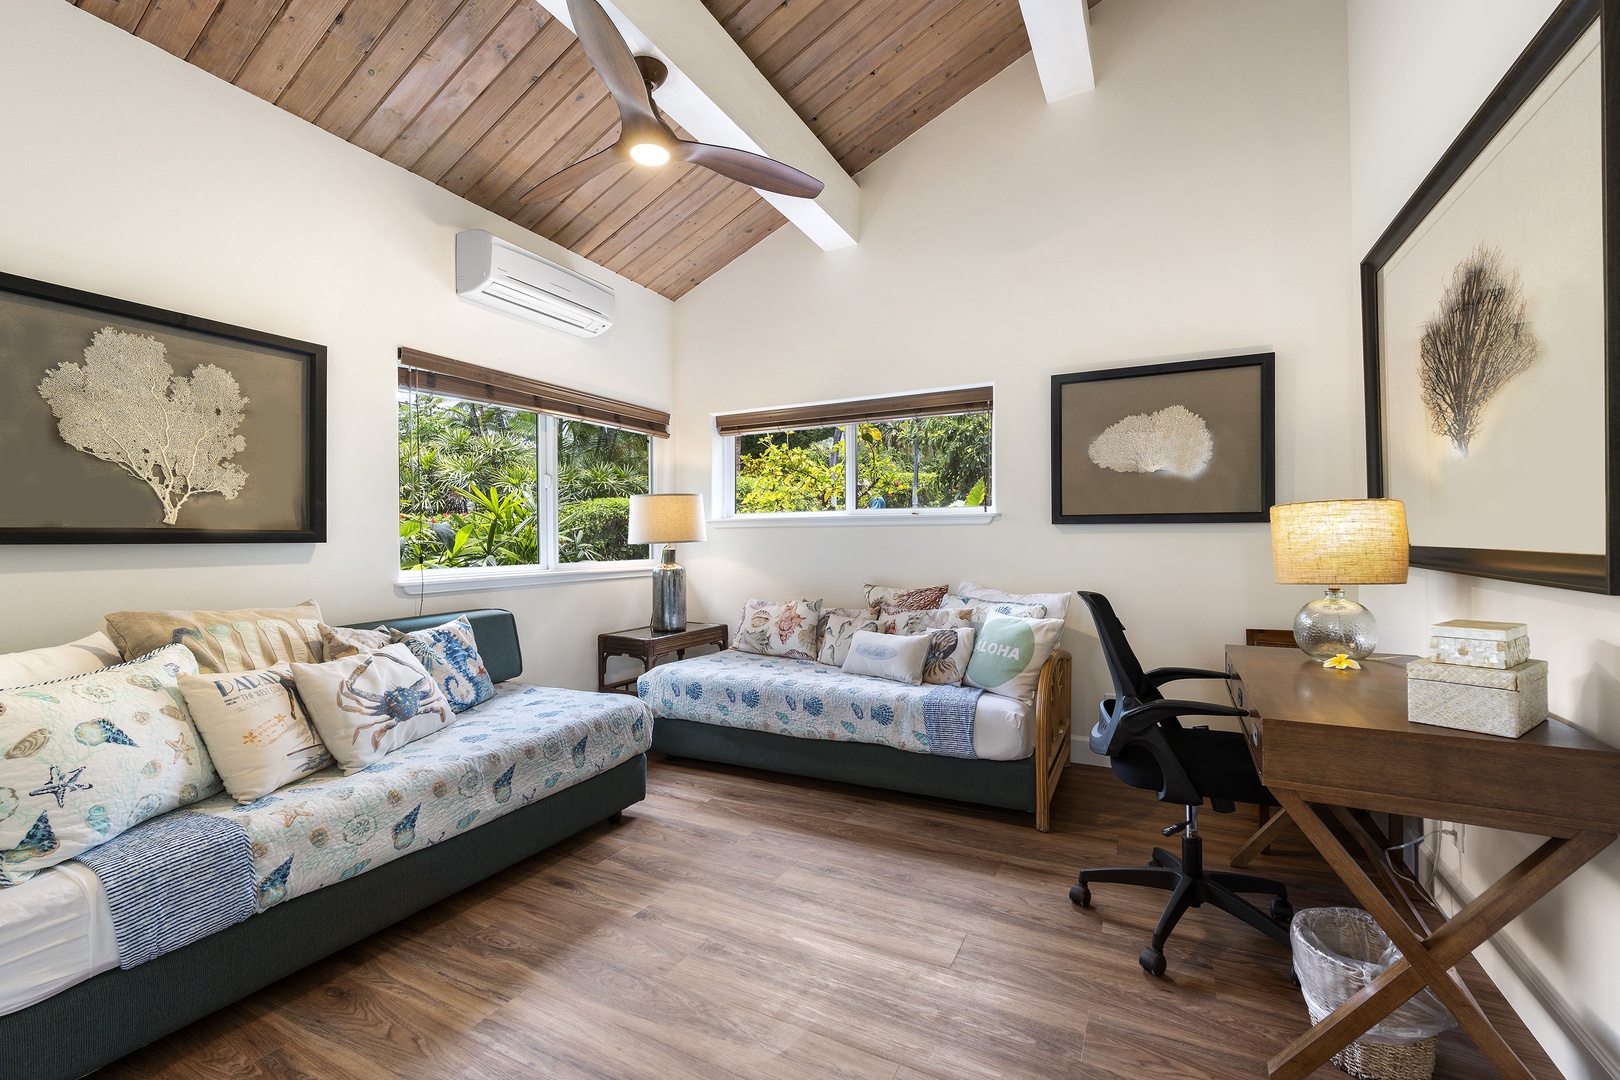 Kailua Kona Vacation Rentals, Hale Pua - Office Suite equipped with 2 Twin beds, A/C, enusite and work station